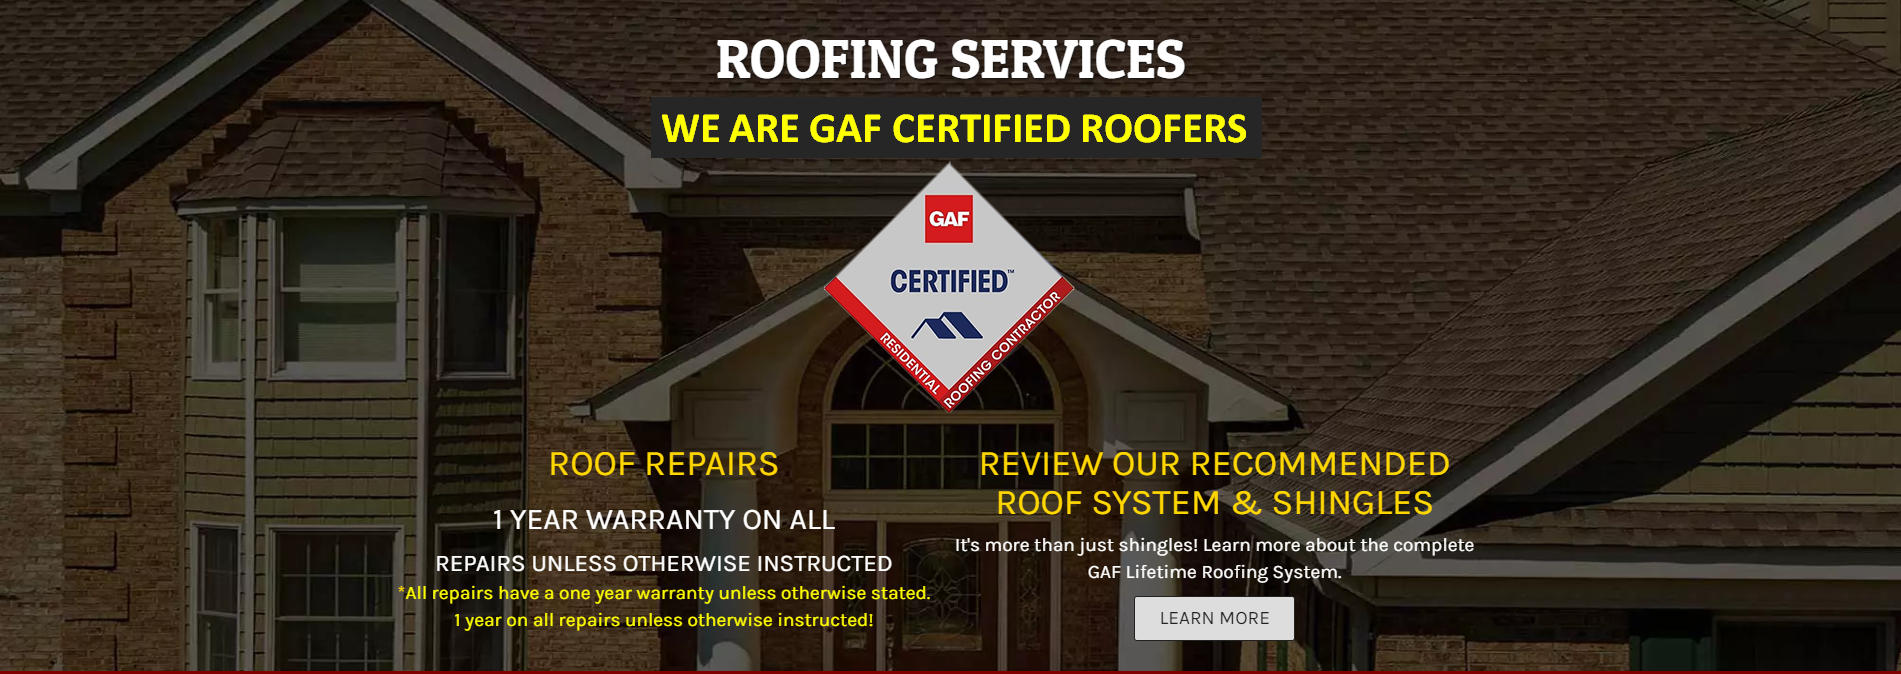 Dallas Roofers GAF Certified Roofers